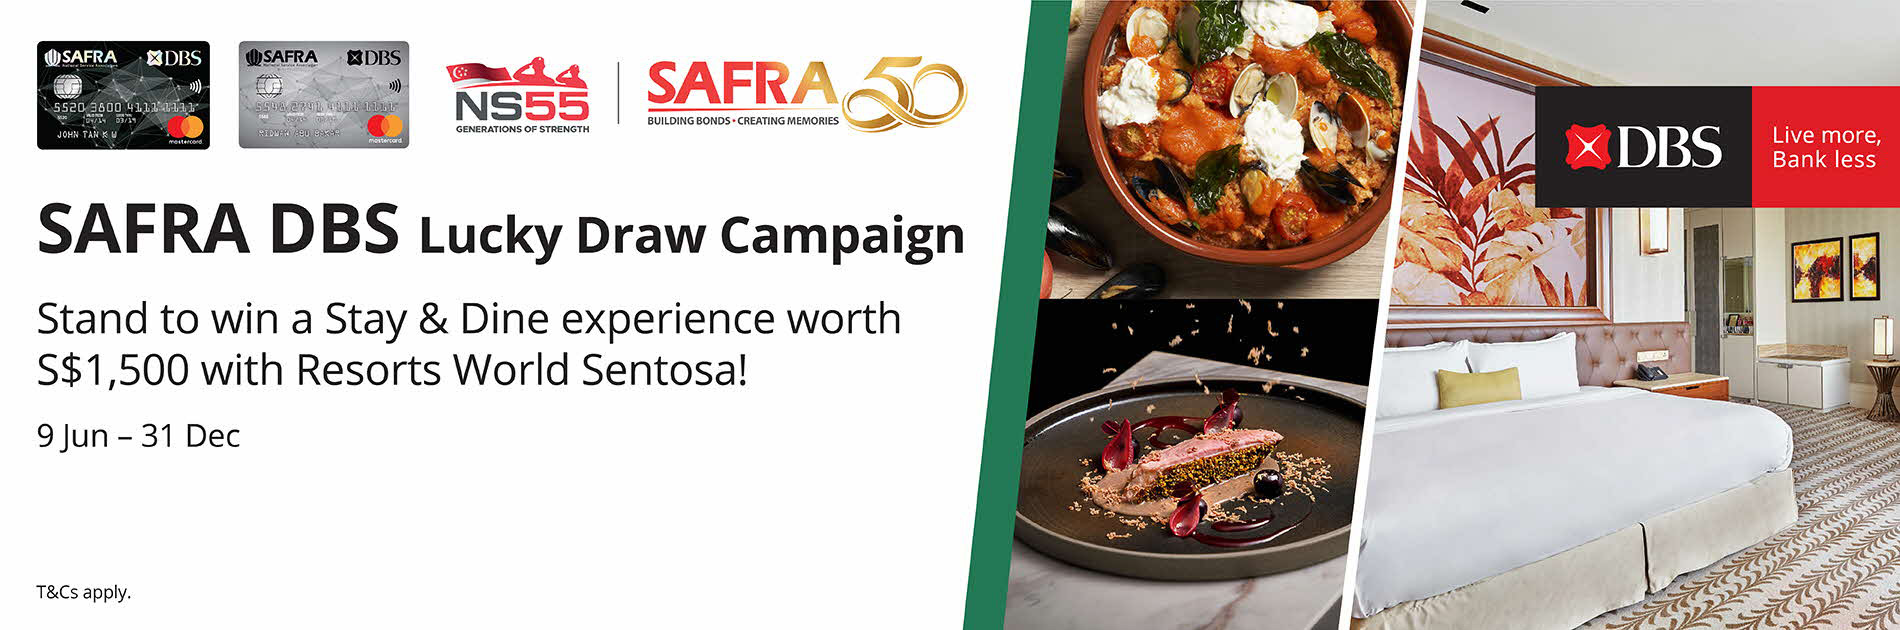 SAFRA-DBS-Lucky-Draw-Campaign-Membership-Banner